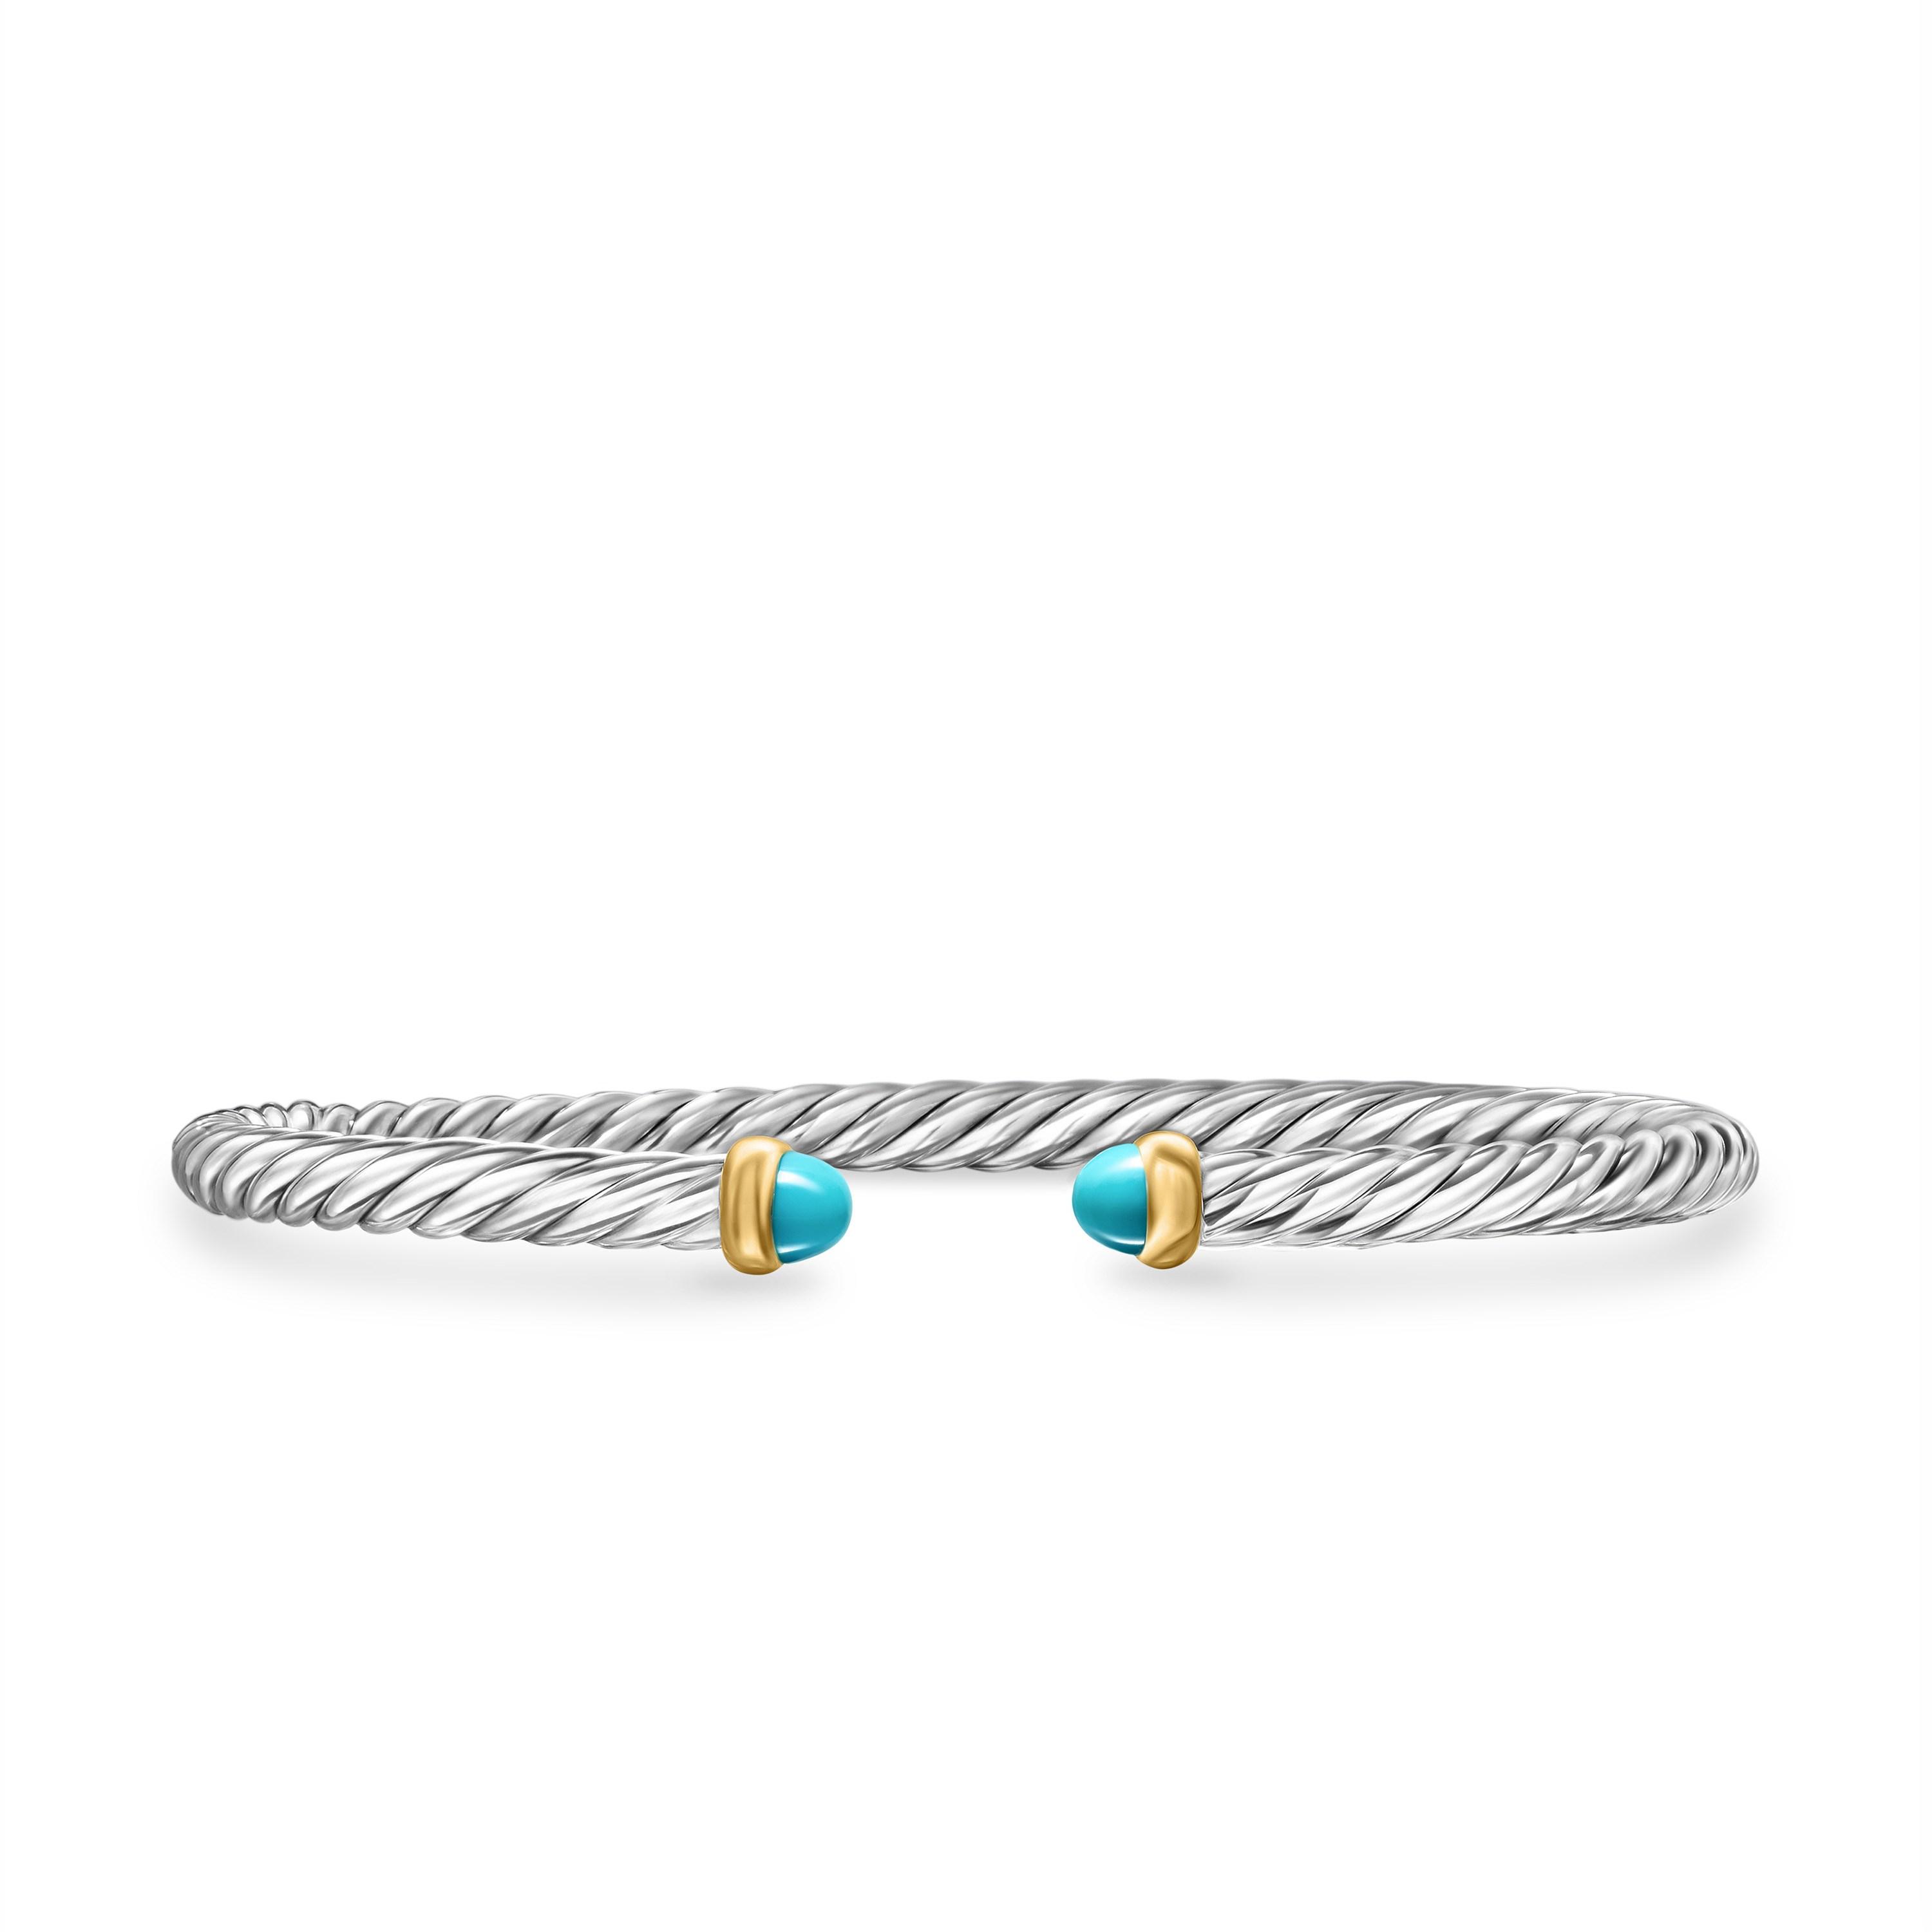 David Yurman Cable Flex Sterling Silver Bracelet with Turquoise, Size Medium